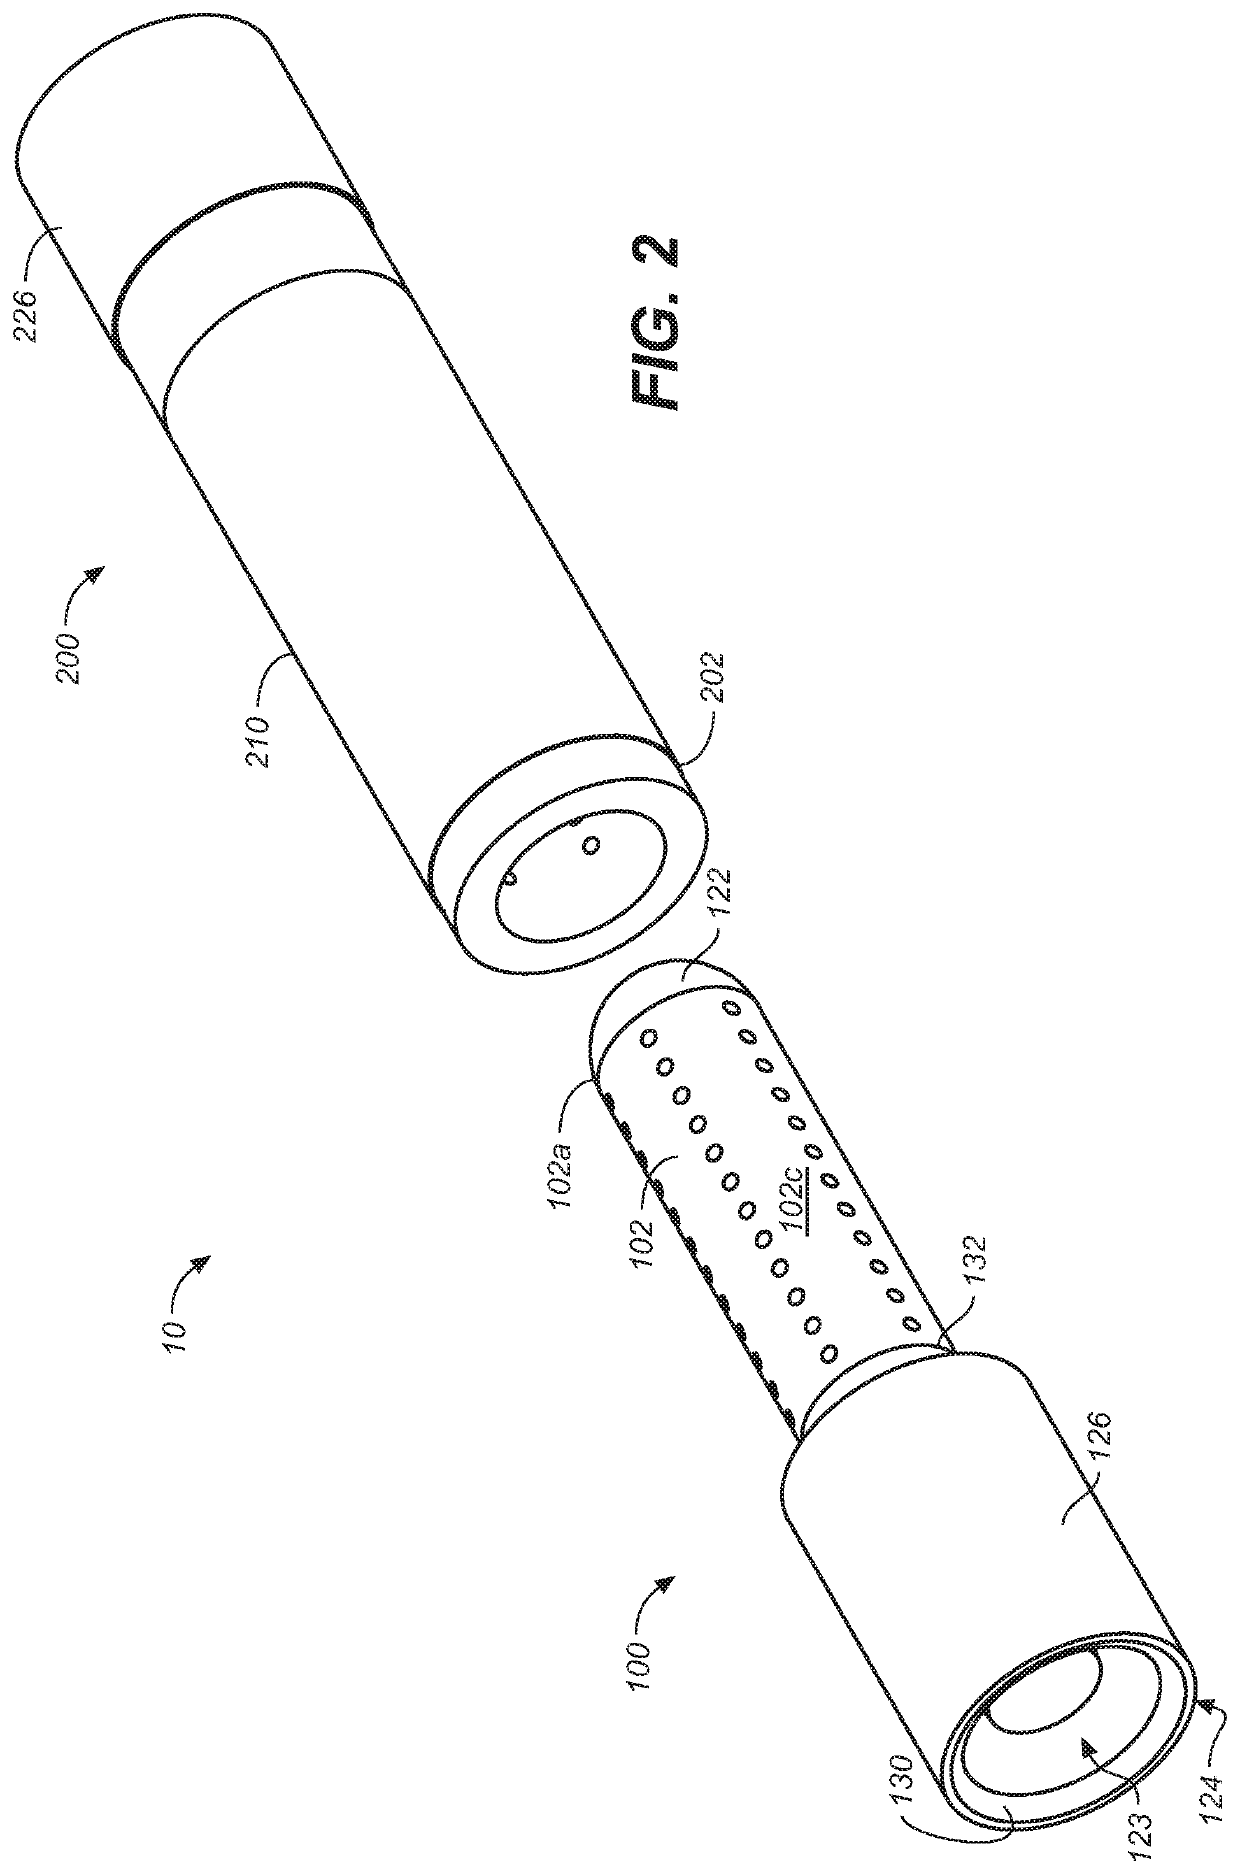 Linear electrical connector with helically distributed terminations